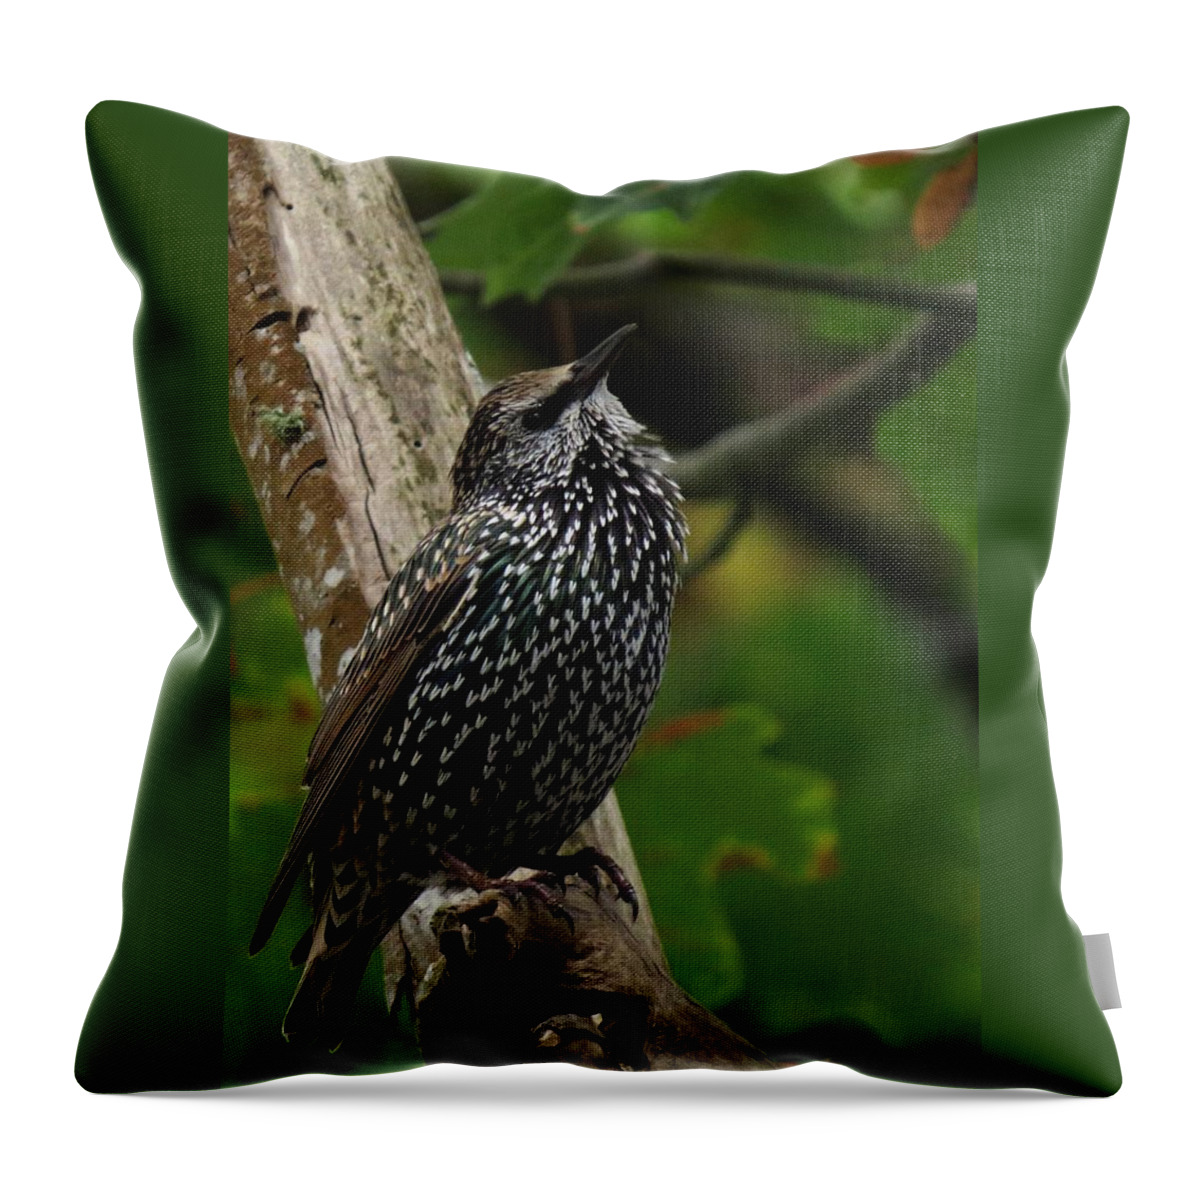 Nw Bird Throw Pillow featuring the photograph Starling Pride by I'ina Van Lawick